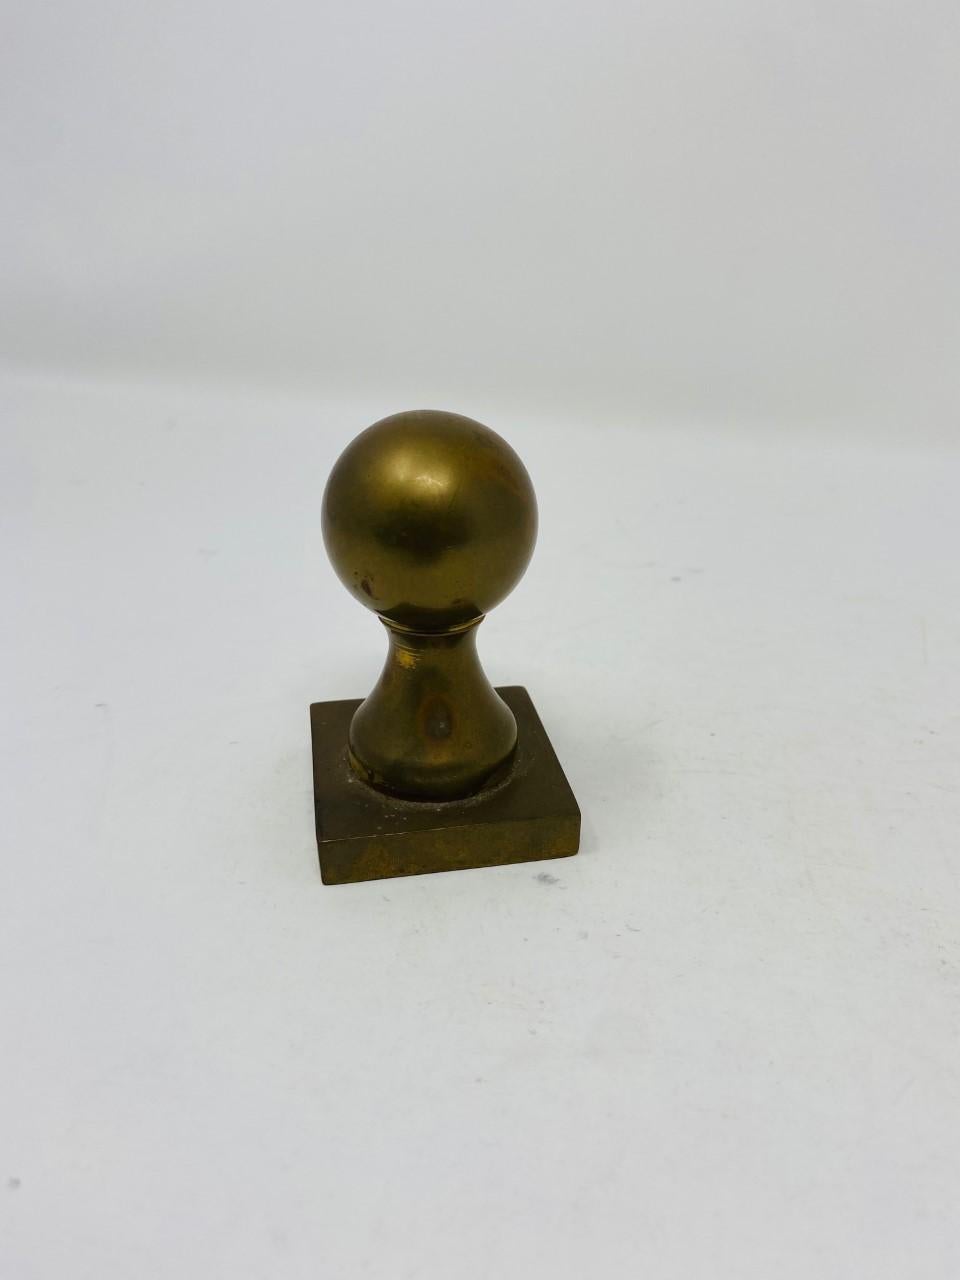 Beautiful and whimsical brass paperweight that adds personality and style to your office or décor. The weighty piece is signed “Made in England” and adds style to any place. A great gift for anyone with a library or a statement piece that adds